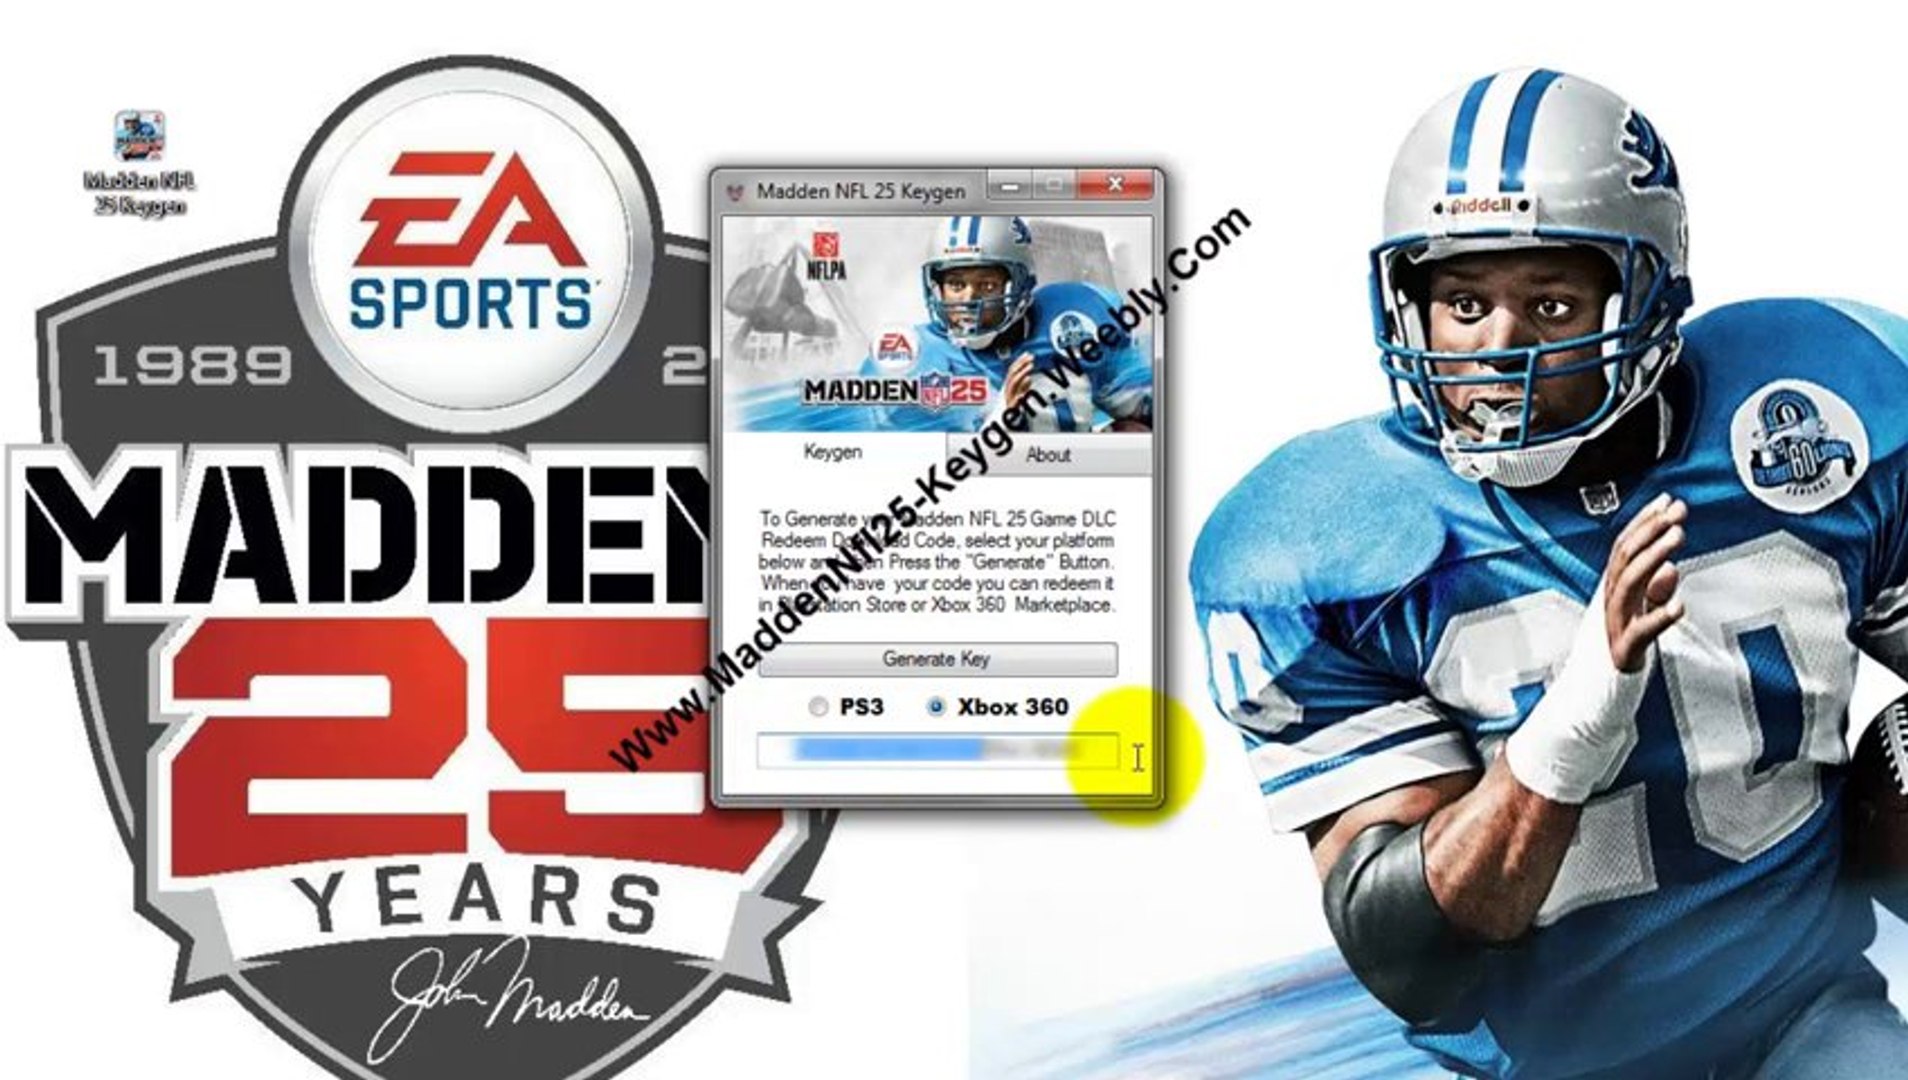 UPDATE] Madden NFL 25 Anniversary Edition Key Generator For Console & iOS [ ps3, xbox 360] - video Dailymotion